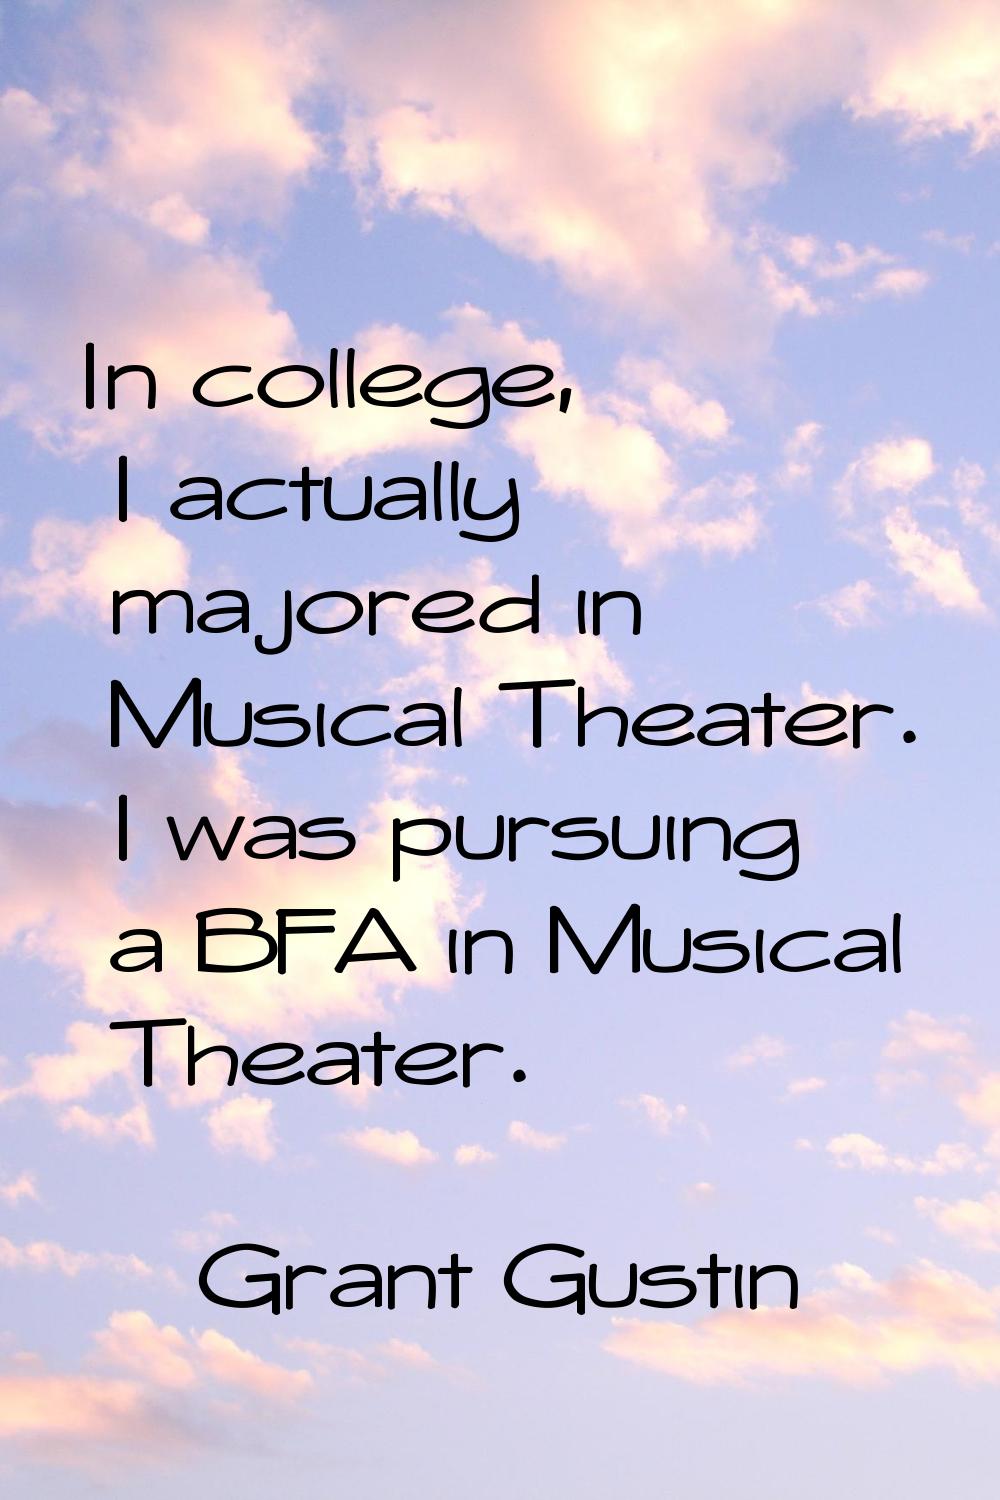 In college, I actually majored in Musical Theater. I was pursuing a BFA in Musical Theater.